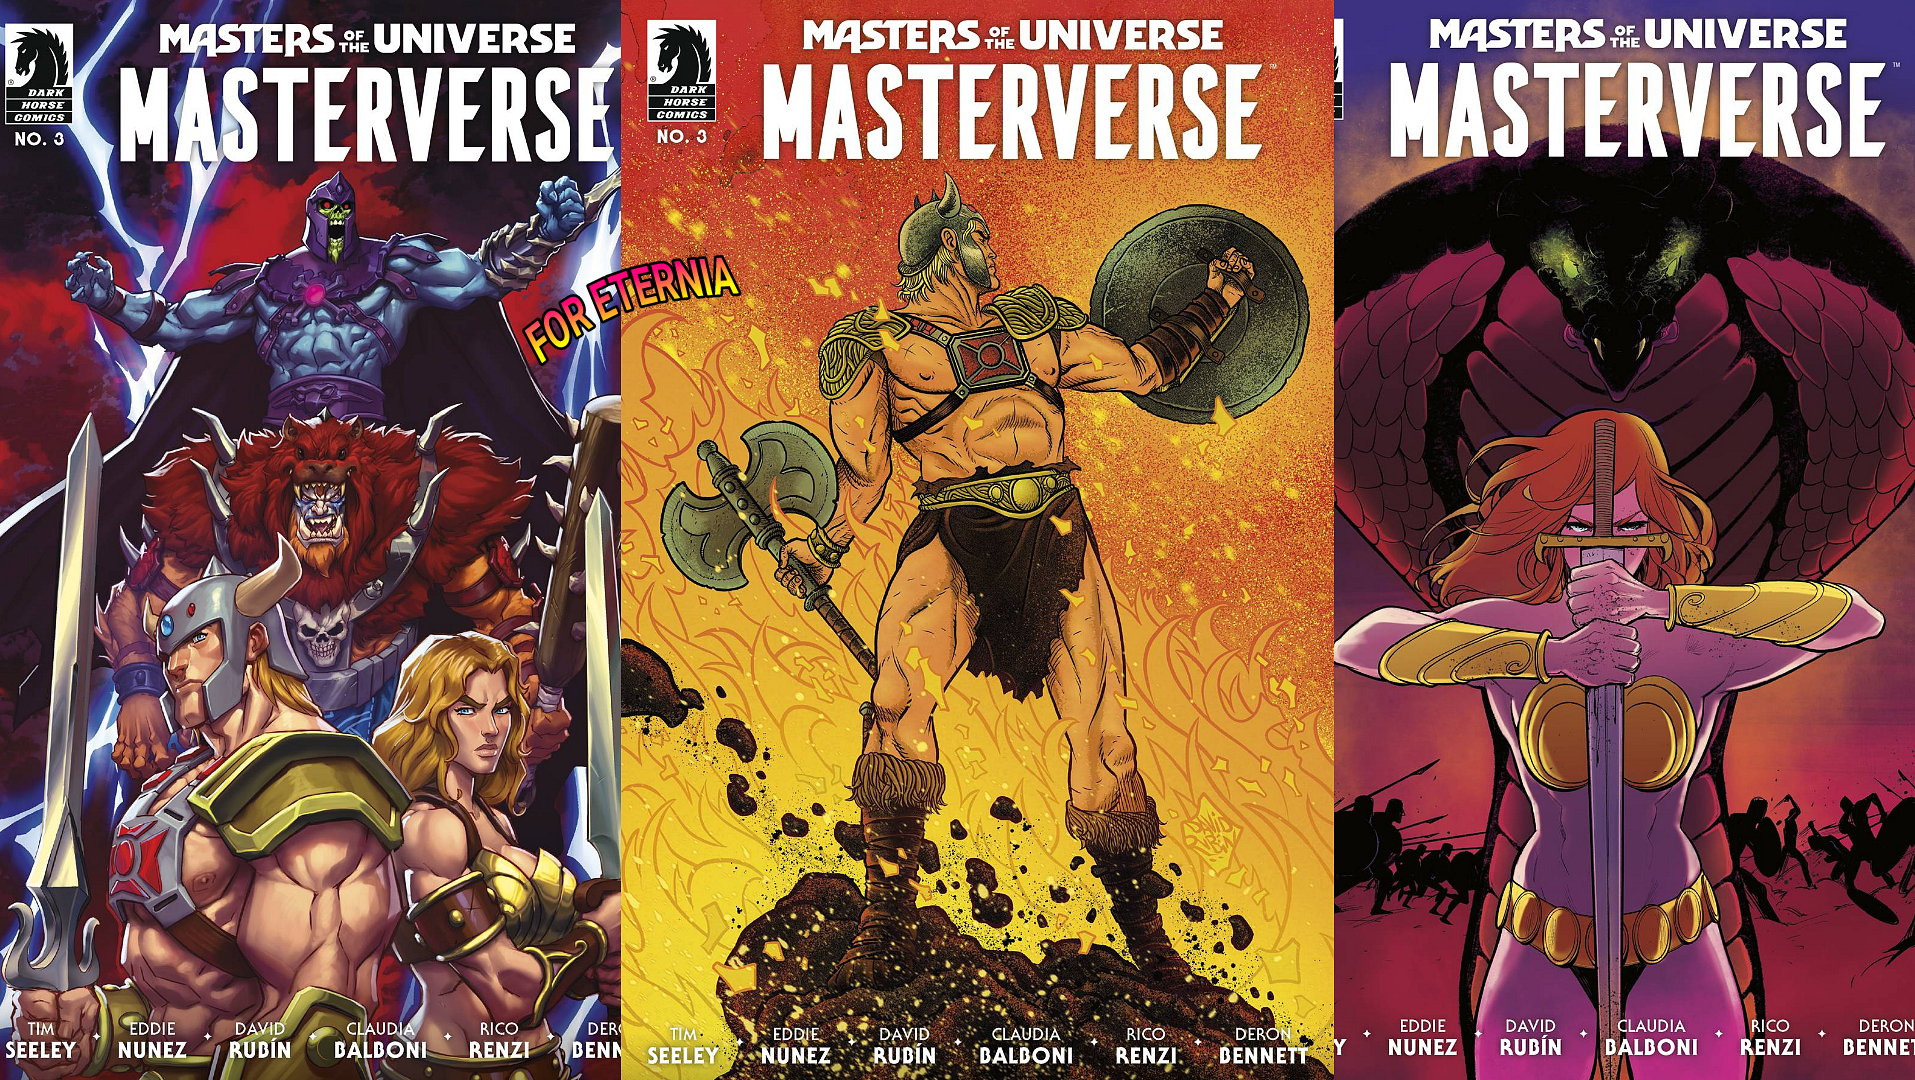 Dark Horse Comics MASTERVERSE issue #3 is out today